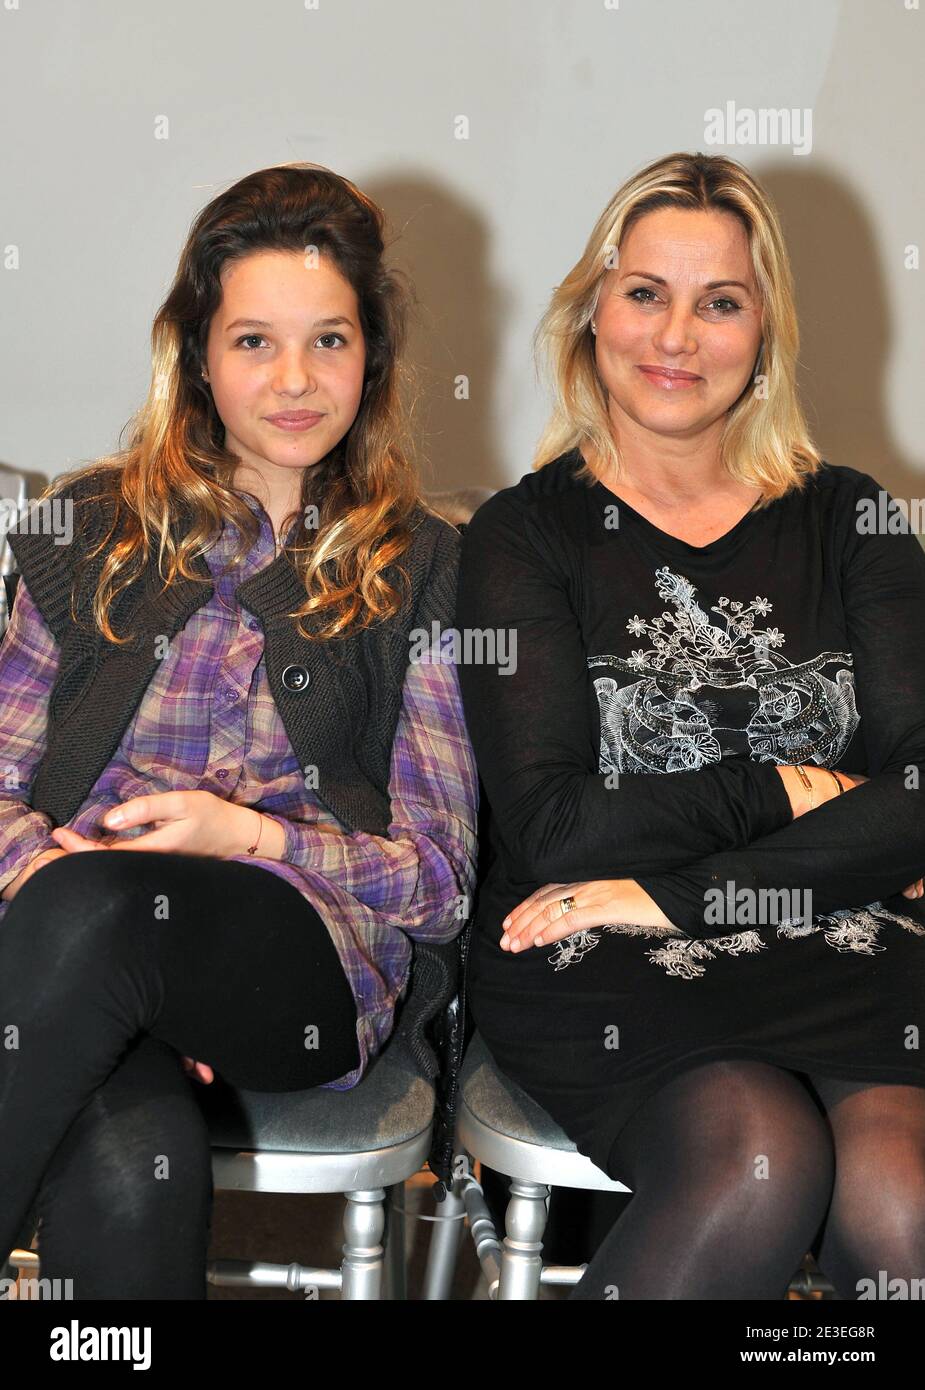 Sophie Favier and her dauhter Carla Marie (13 year old) attending the Basil Soda Spring-Summer 2009-2010 fashion show, held at Palais de Tokyo in Paris, France on January 27, 2009. Photo by Edouard Bernaux/ABACAPRESS.COM Stock Photo